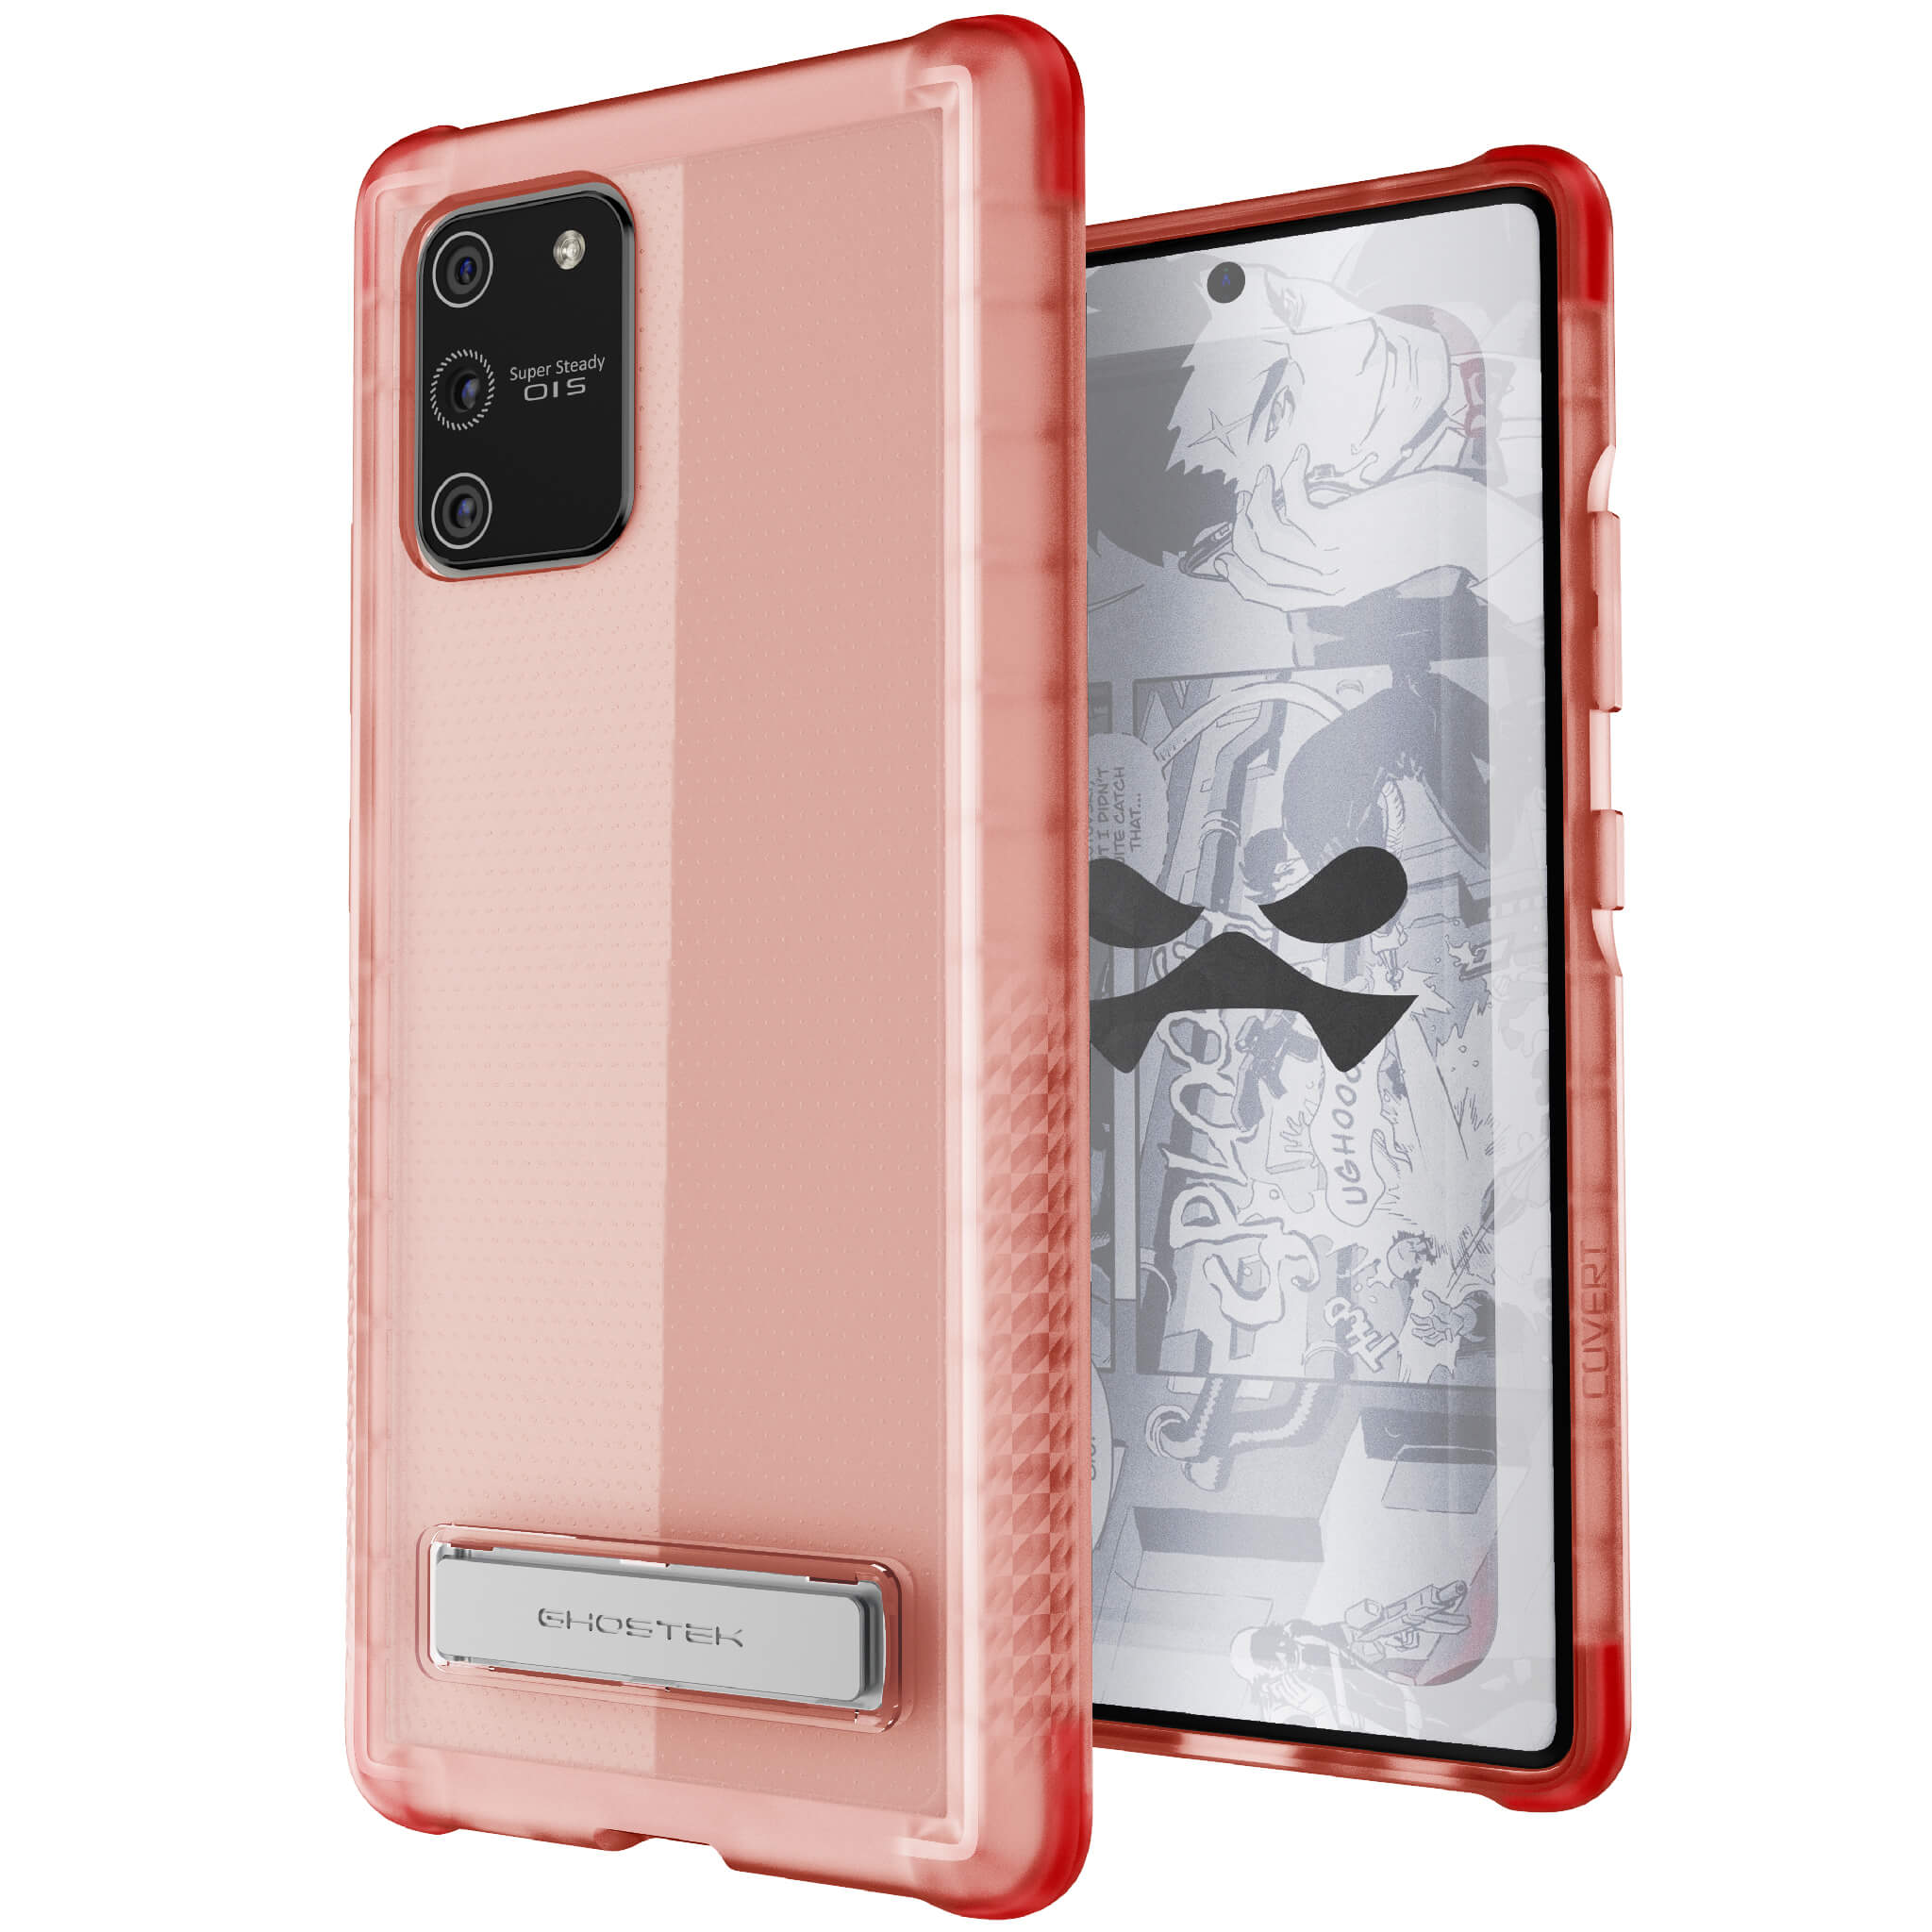 COVERT CLEAR Case for Galaxy S10 Lite